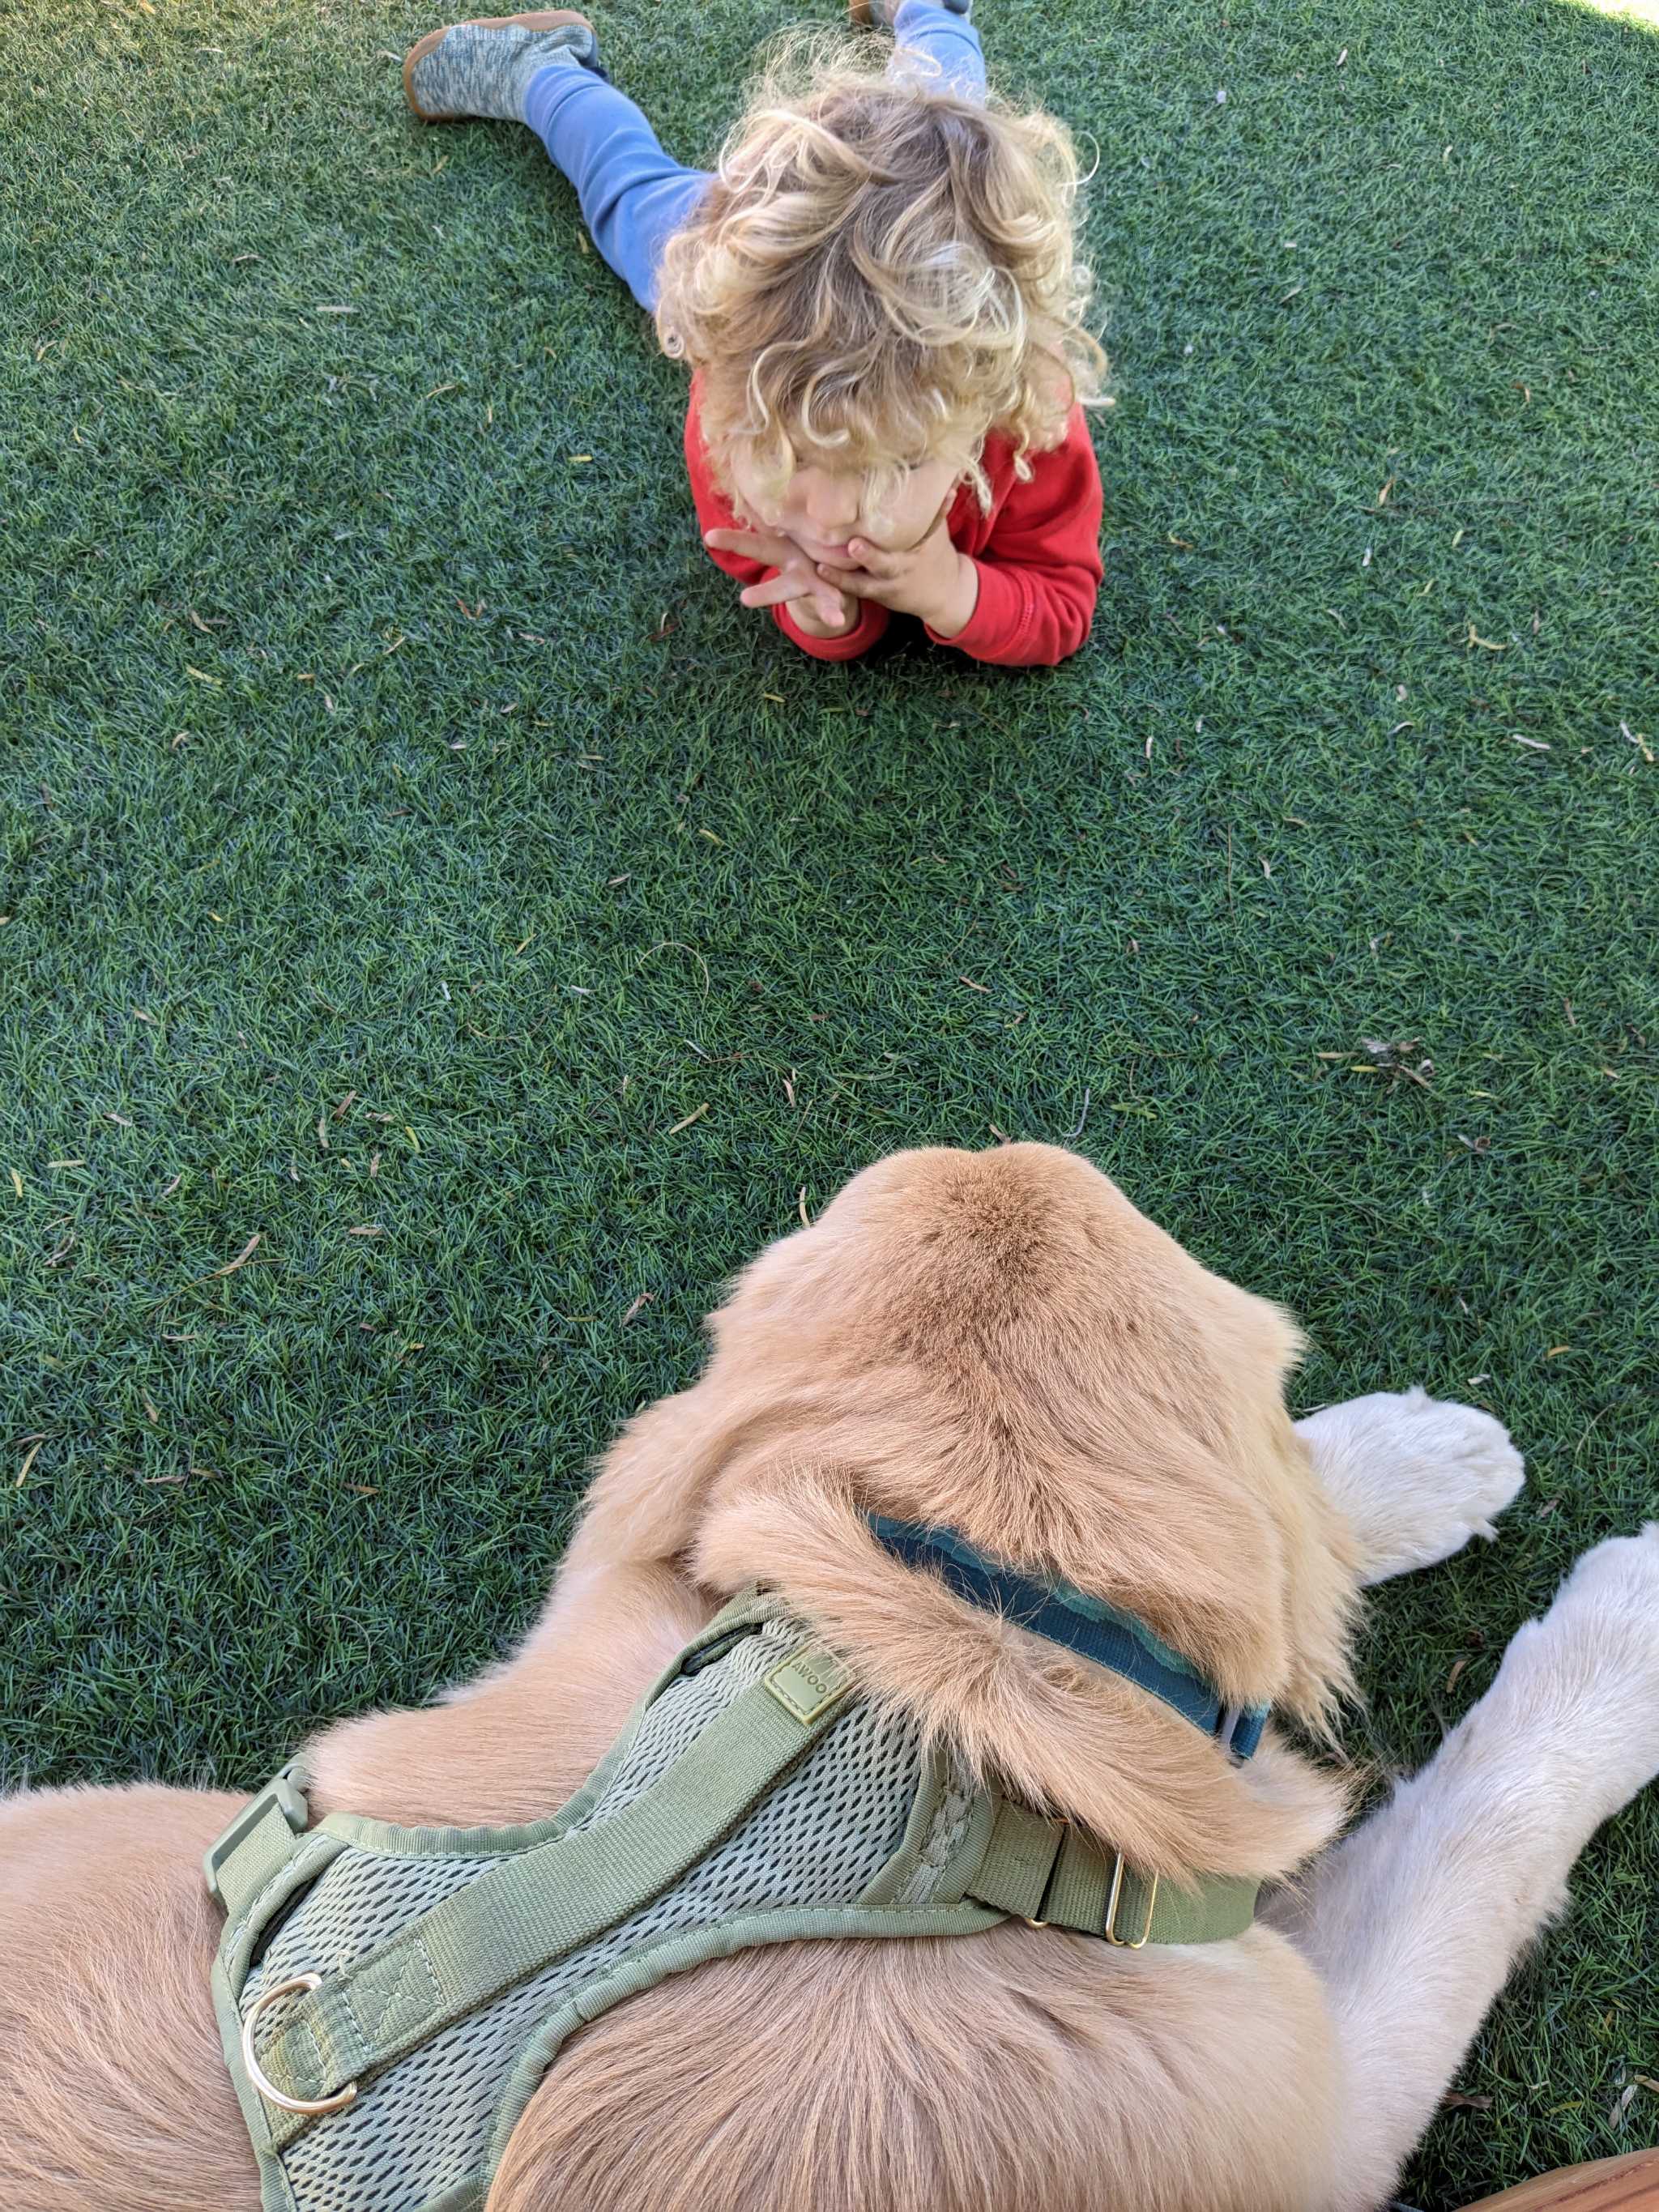 A dog and boy lay on the ground looking at each other.